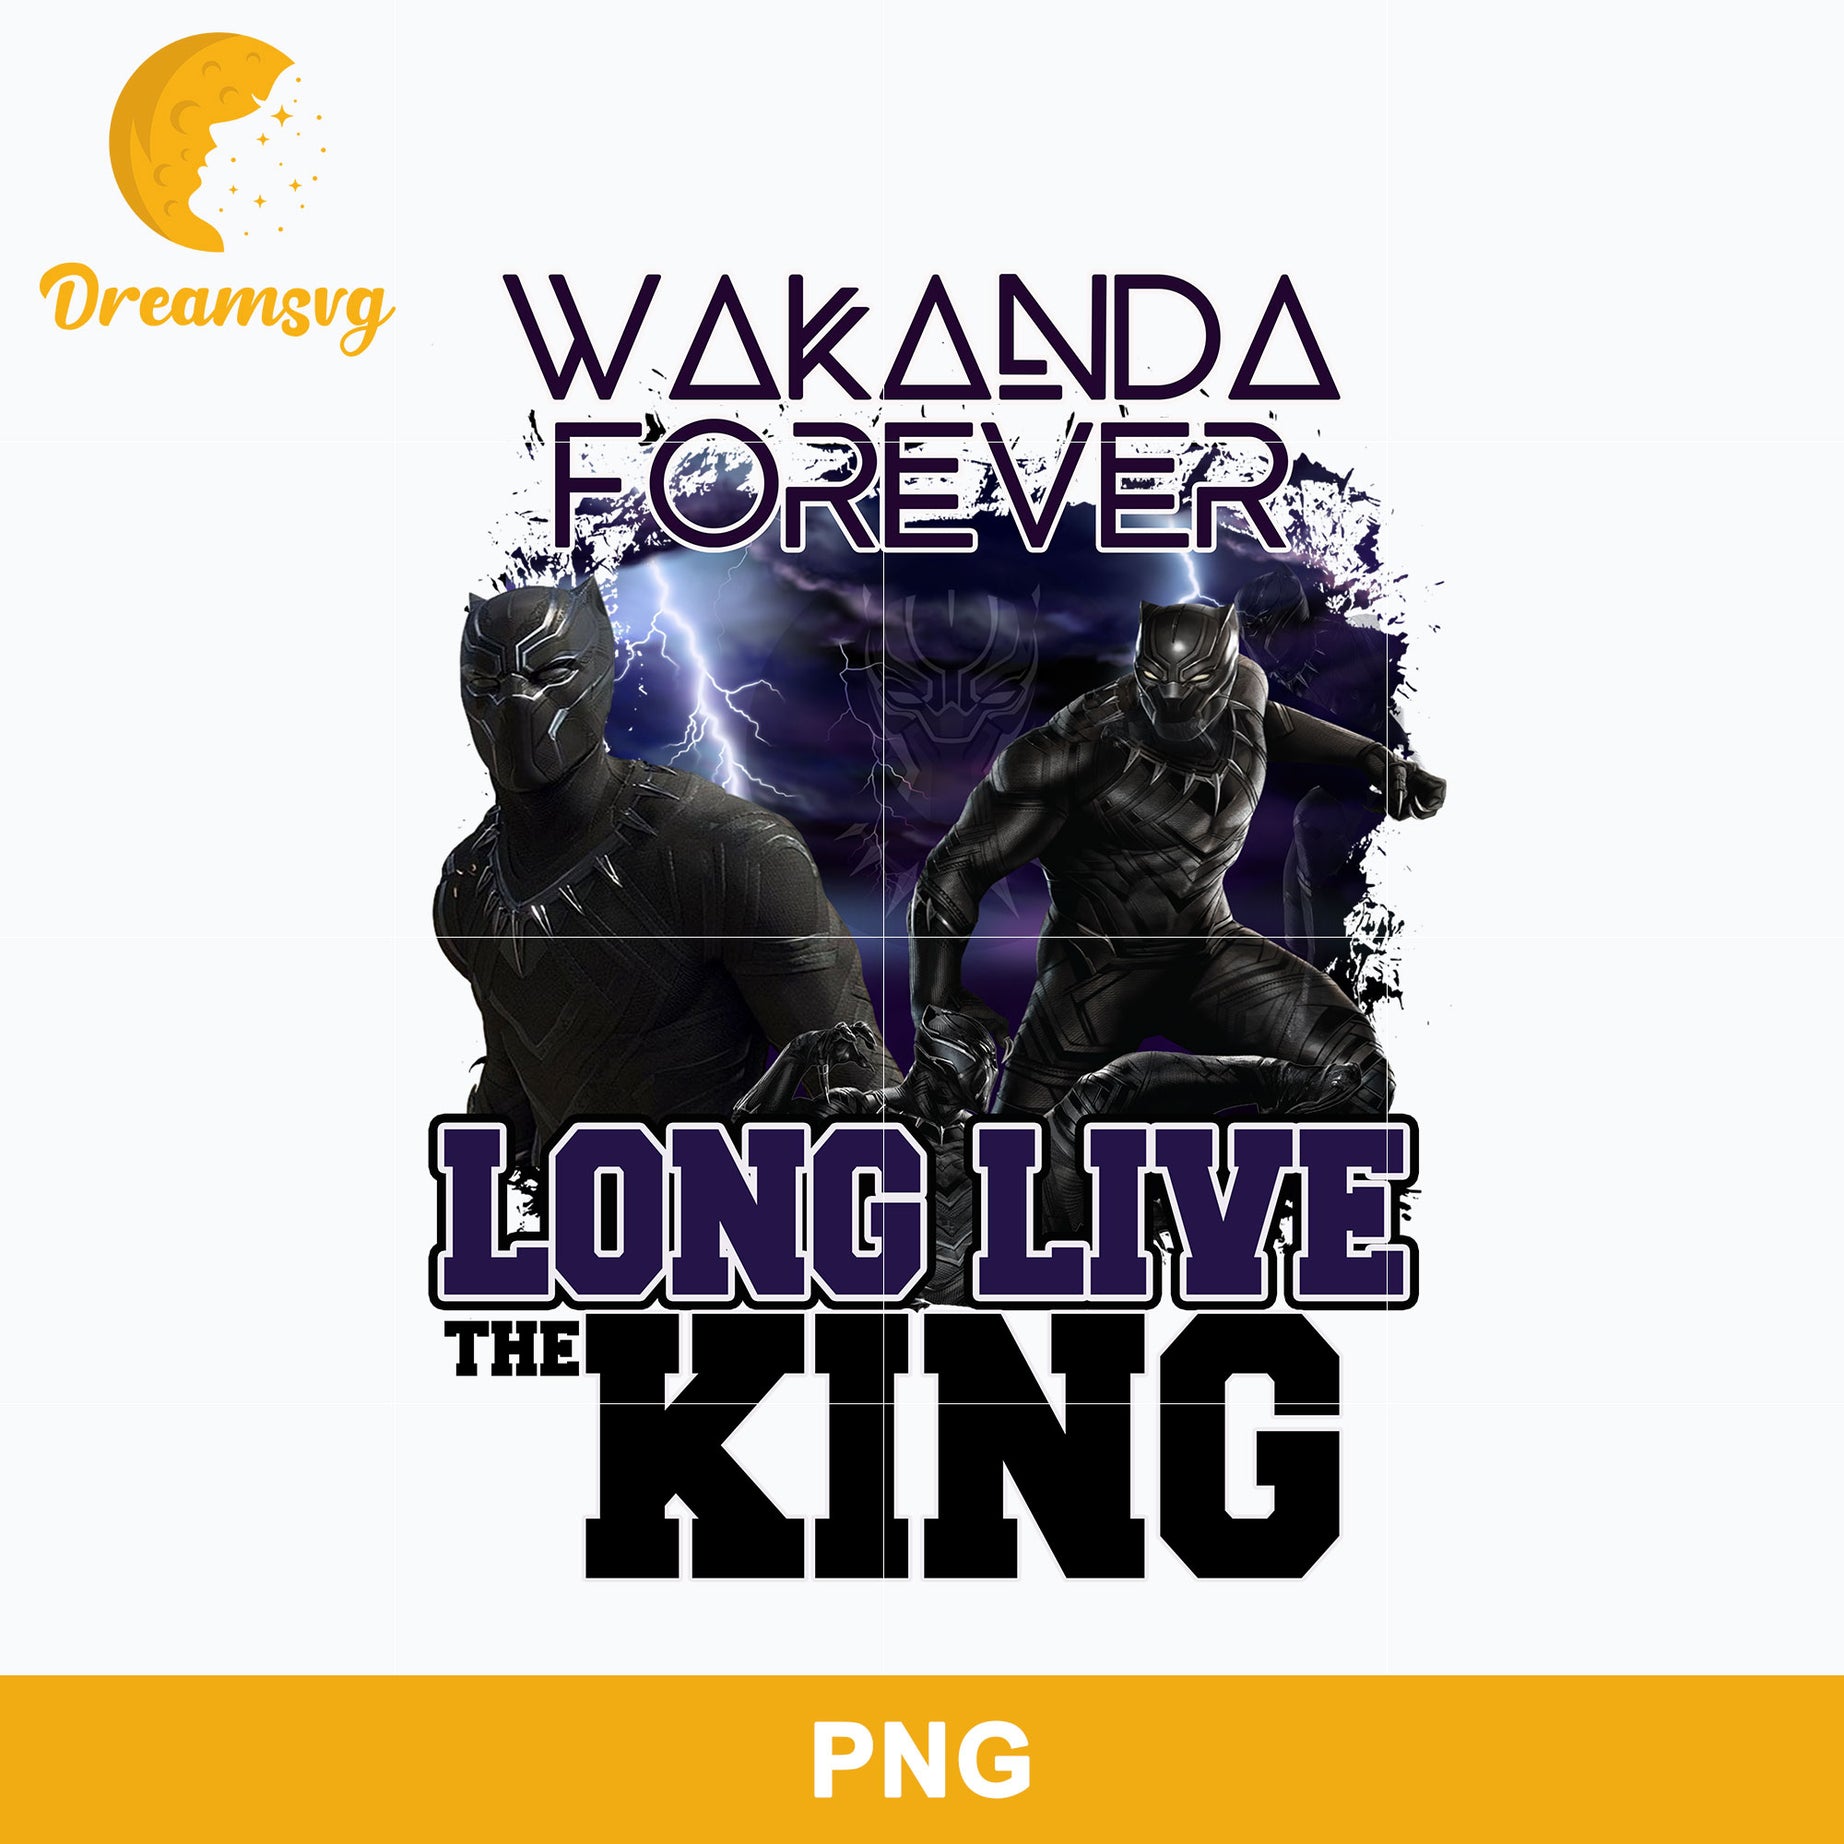 Black Panther Long Live The King PNG, Wakanda Forever PNG, Marvel PNG